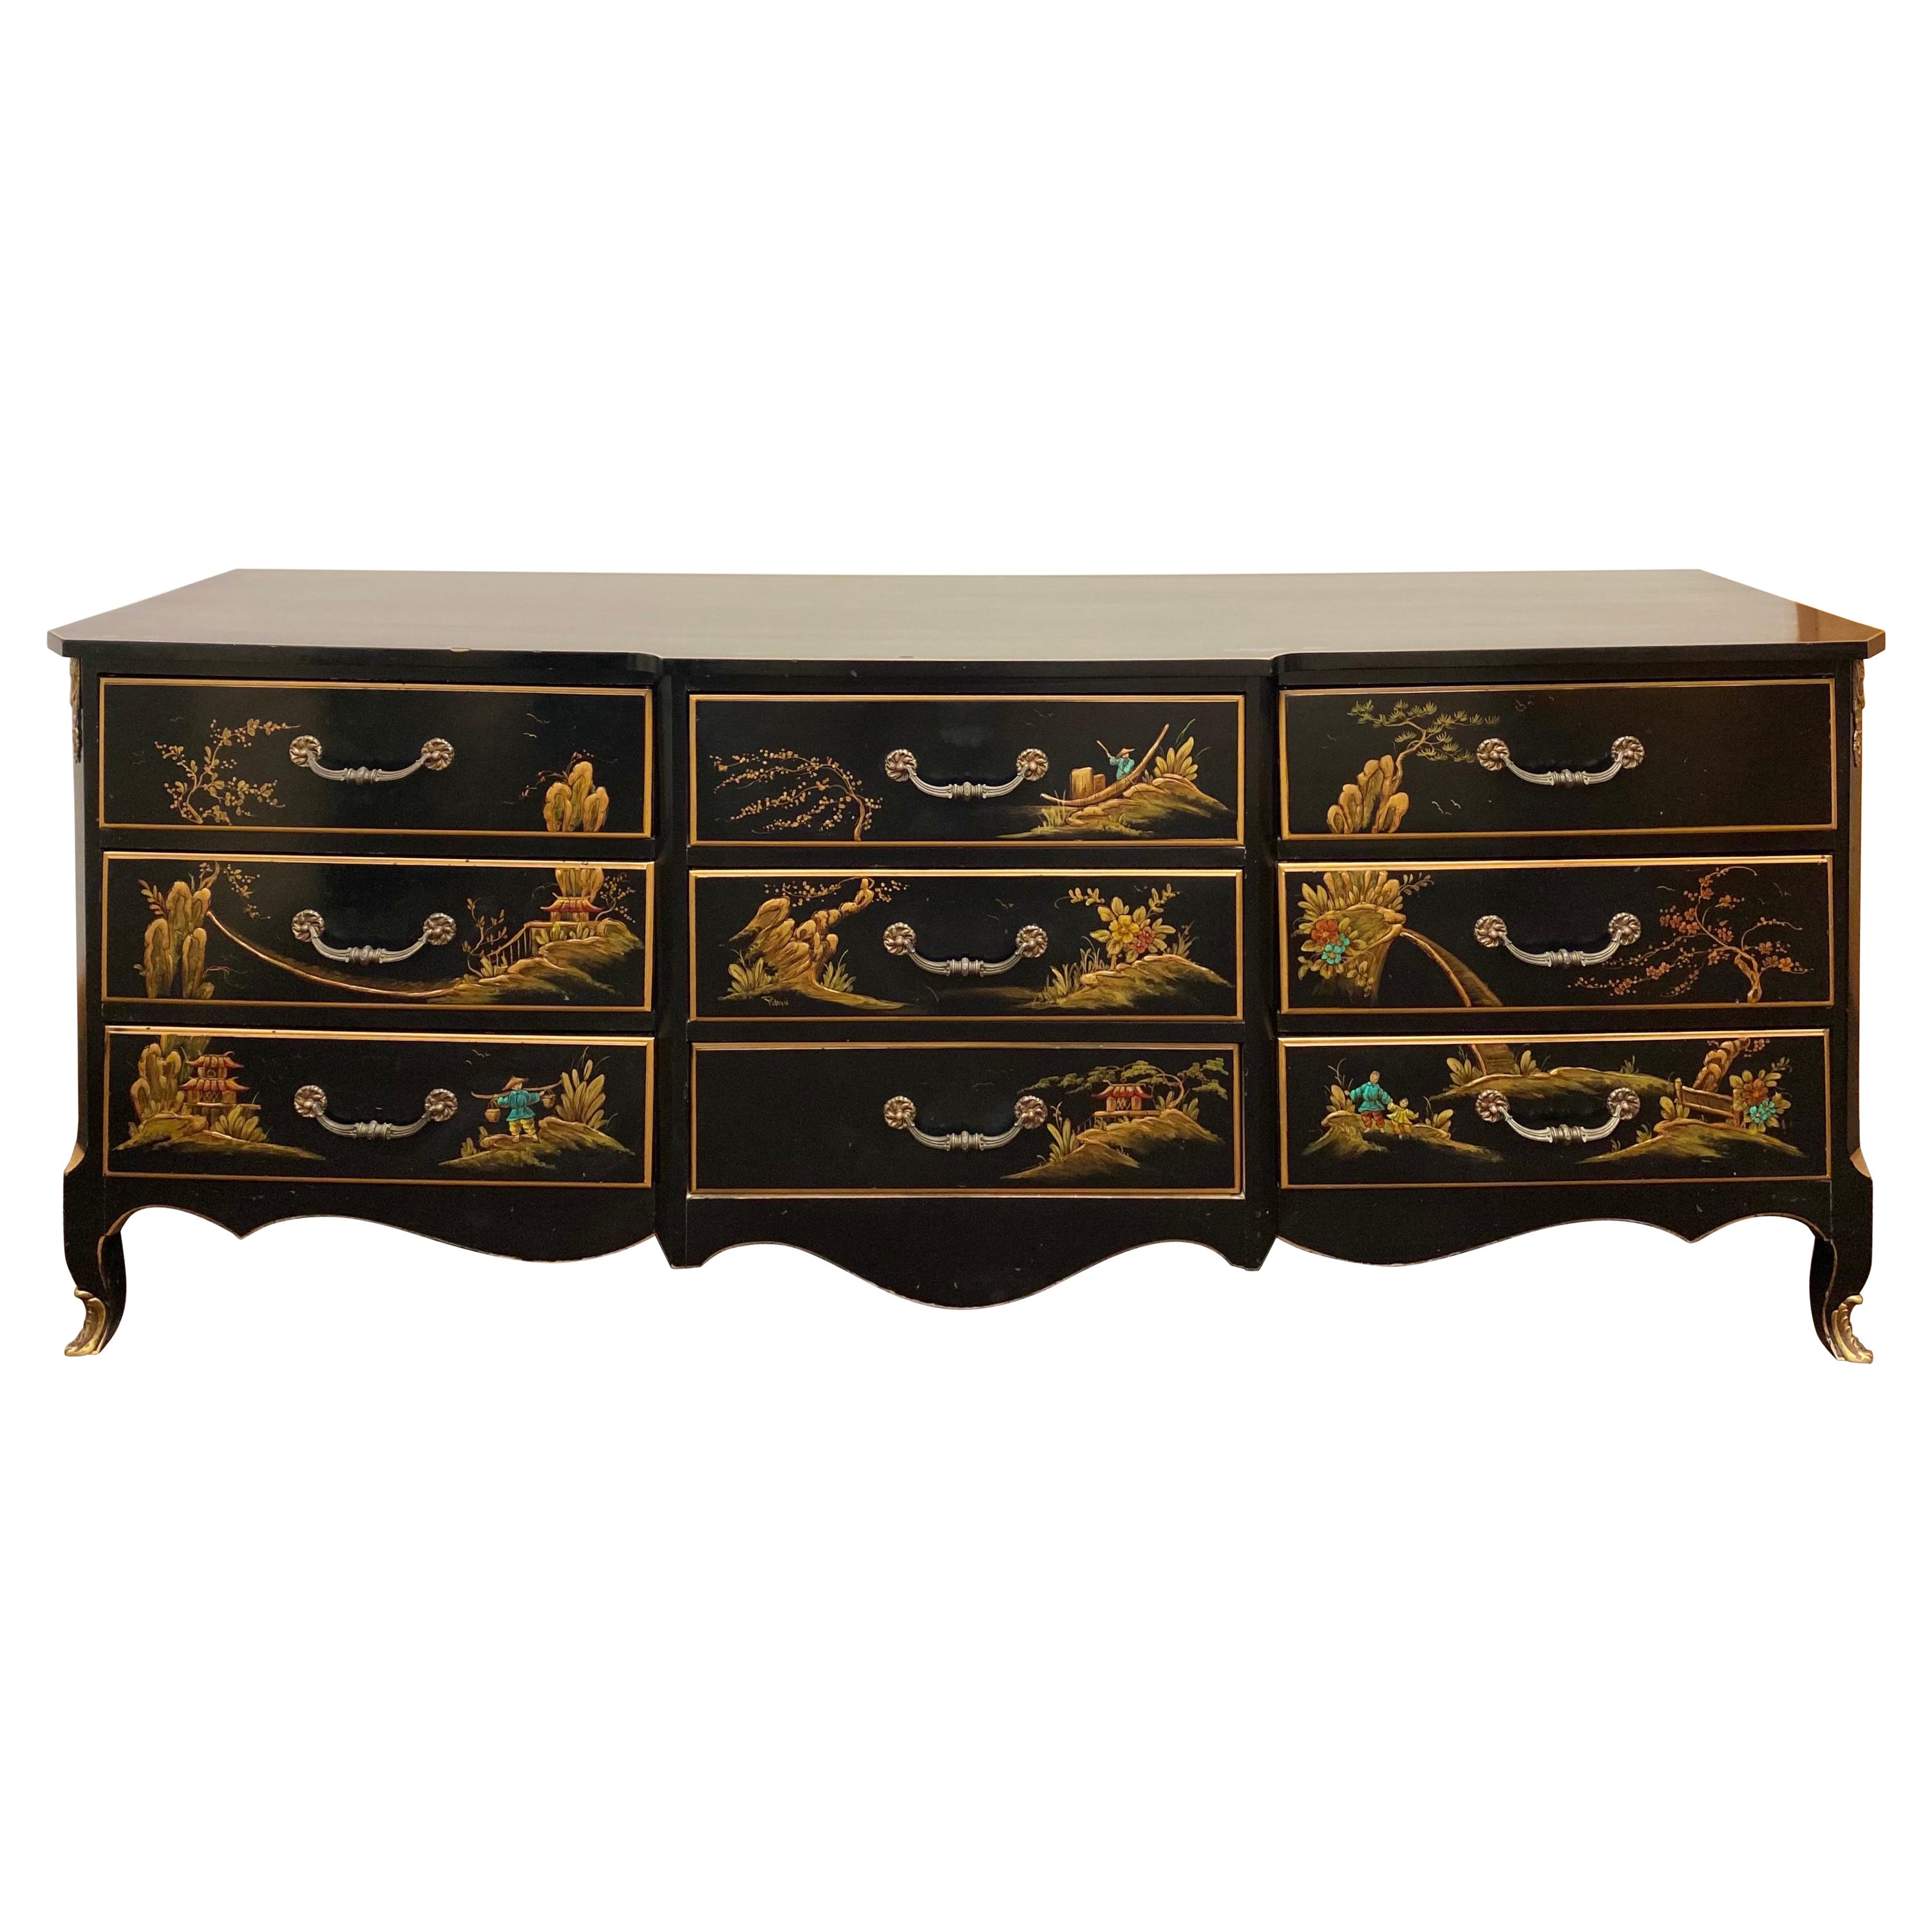 1950s French Louis XV Chinoiserie Style Black Lacquered Dresser